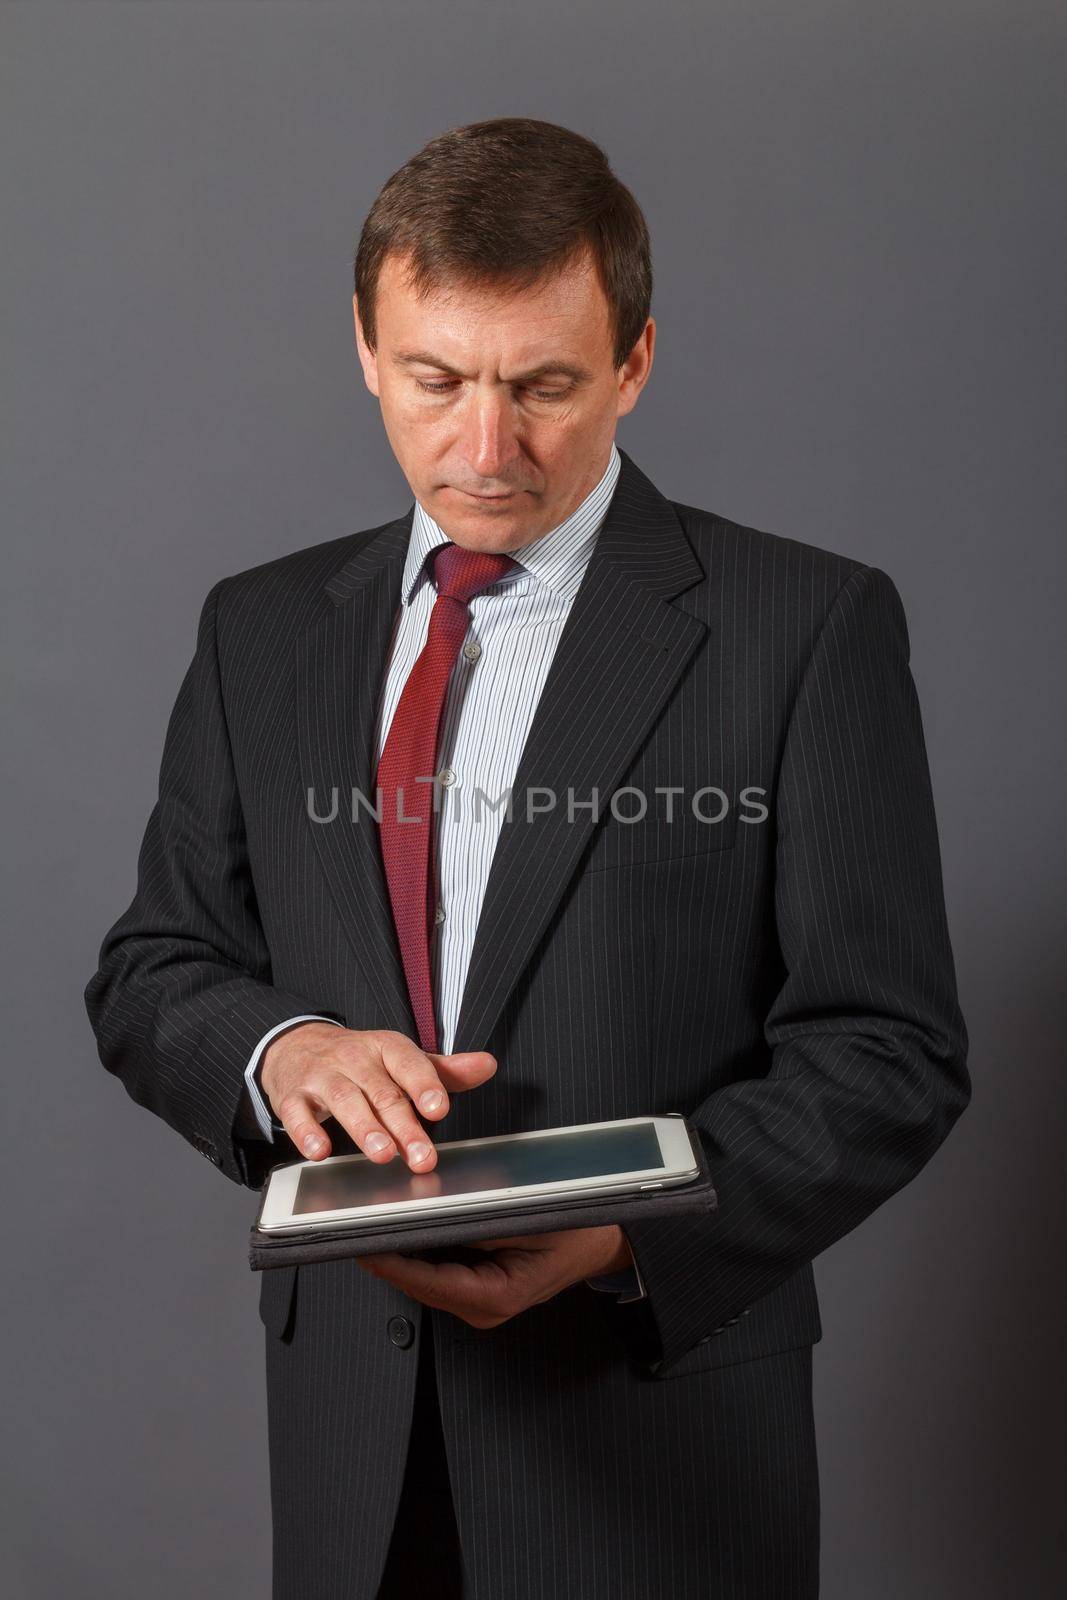 Confident and friendly elegant handsome mature businessman standing in front of a grey background holding a notebook